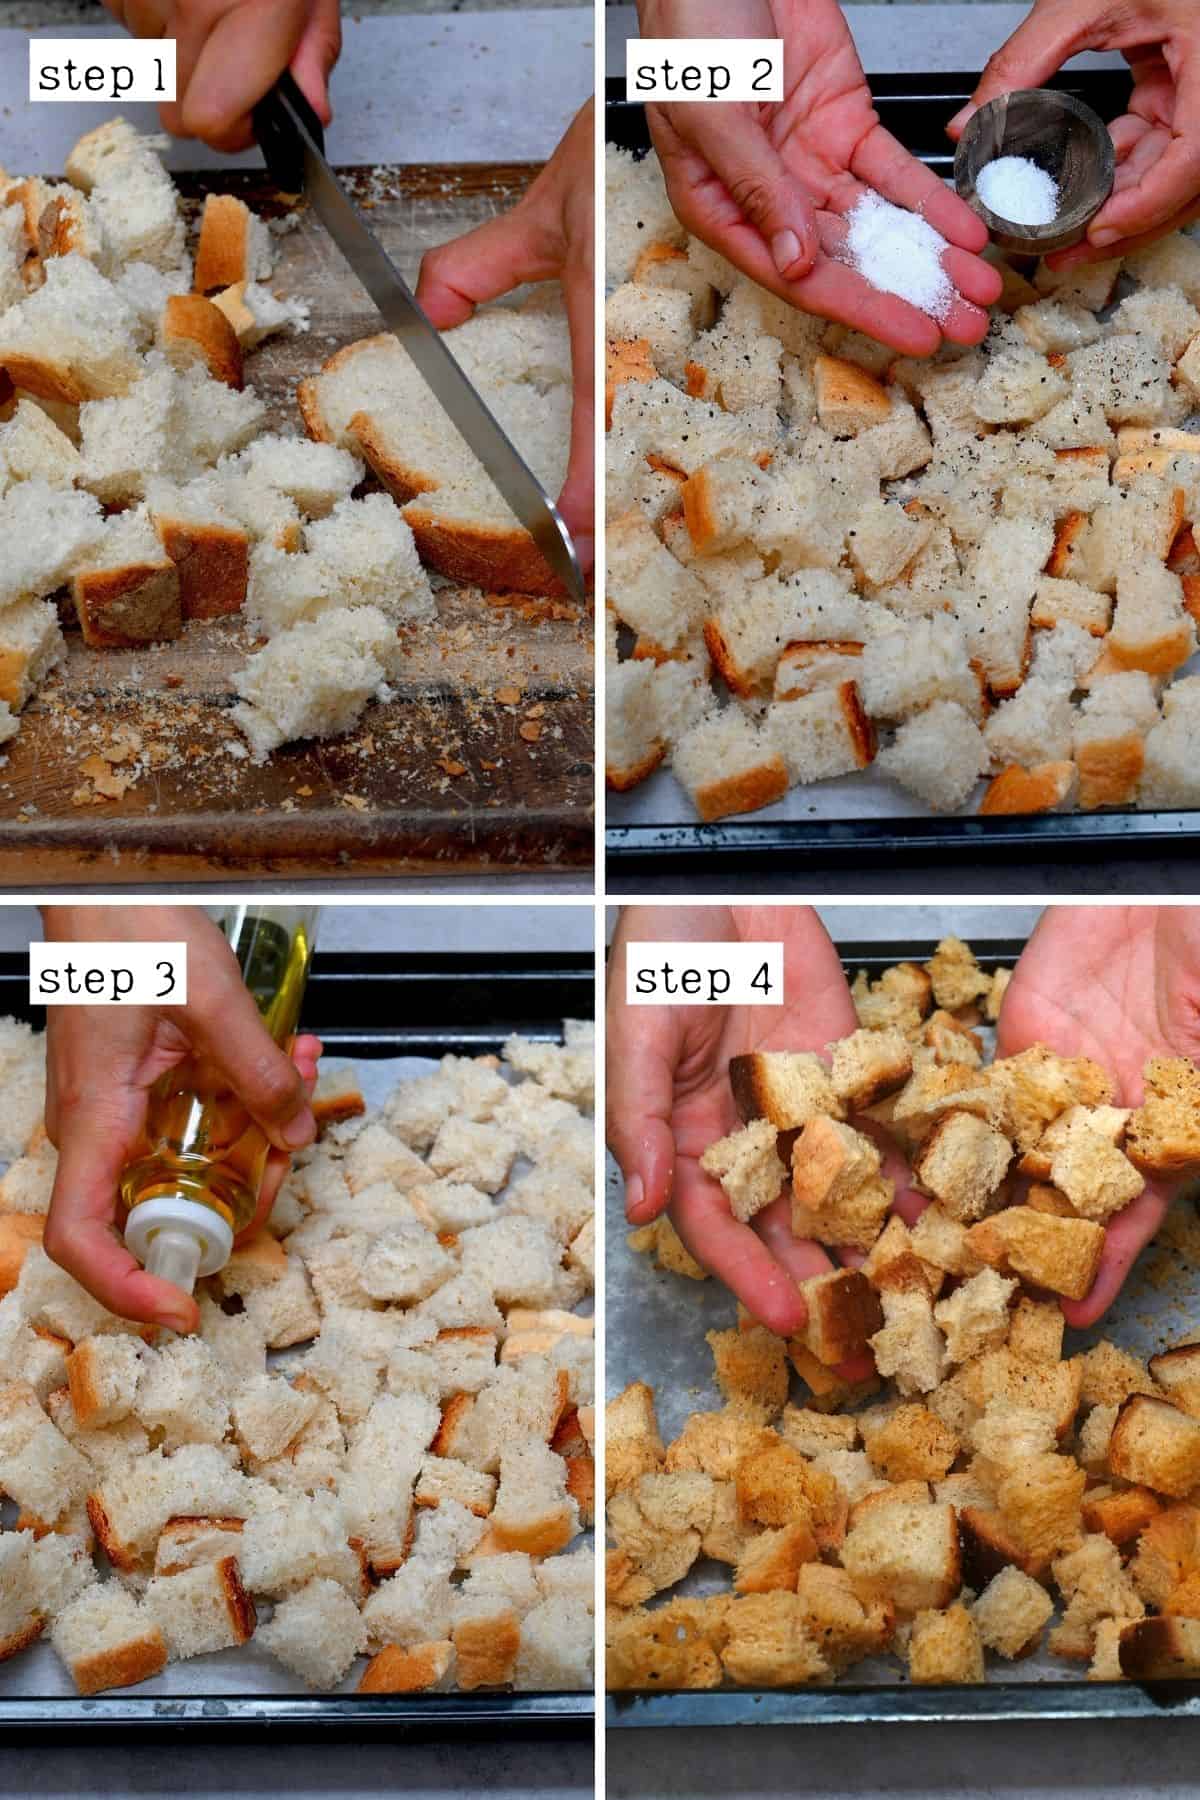 Steps for making dried bread cubes